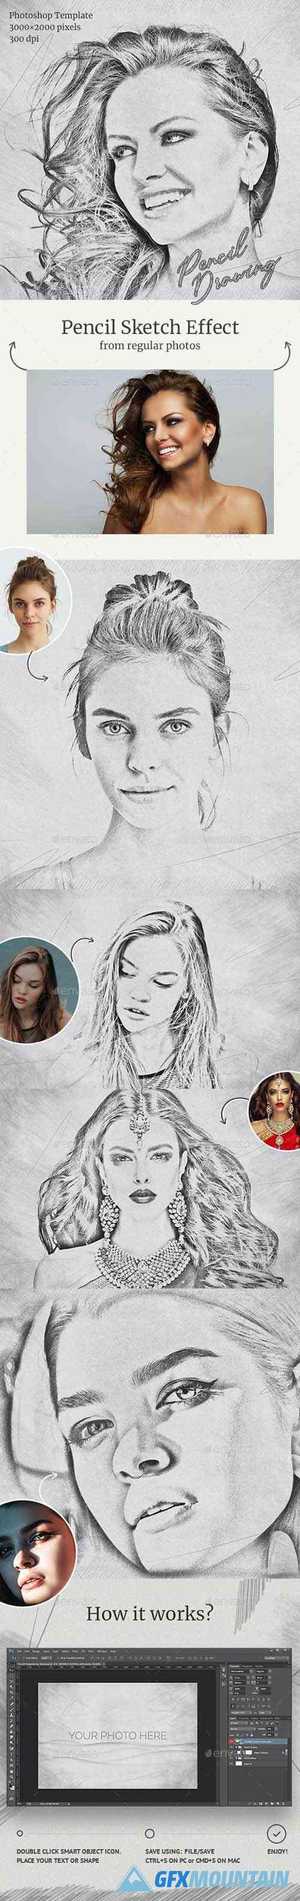 Pencil Drawing Photoshop Template 28663627